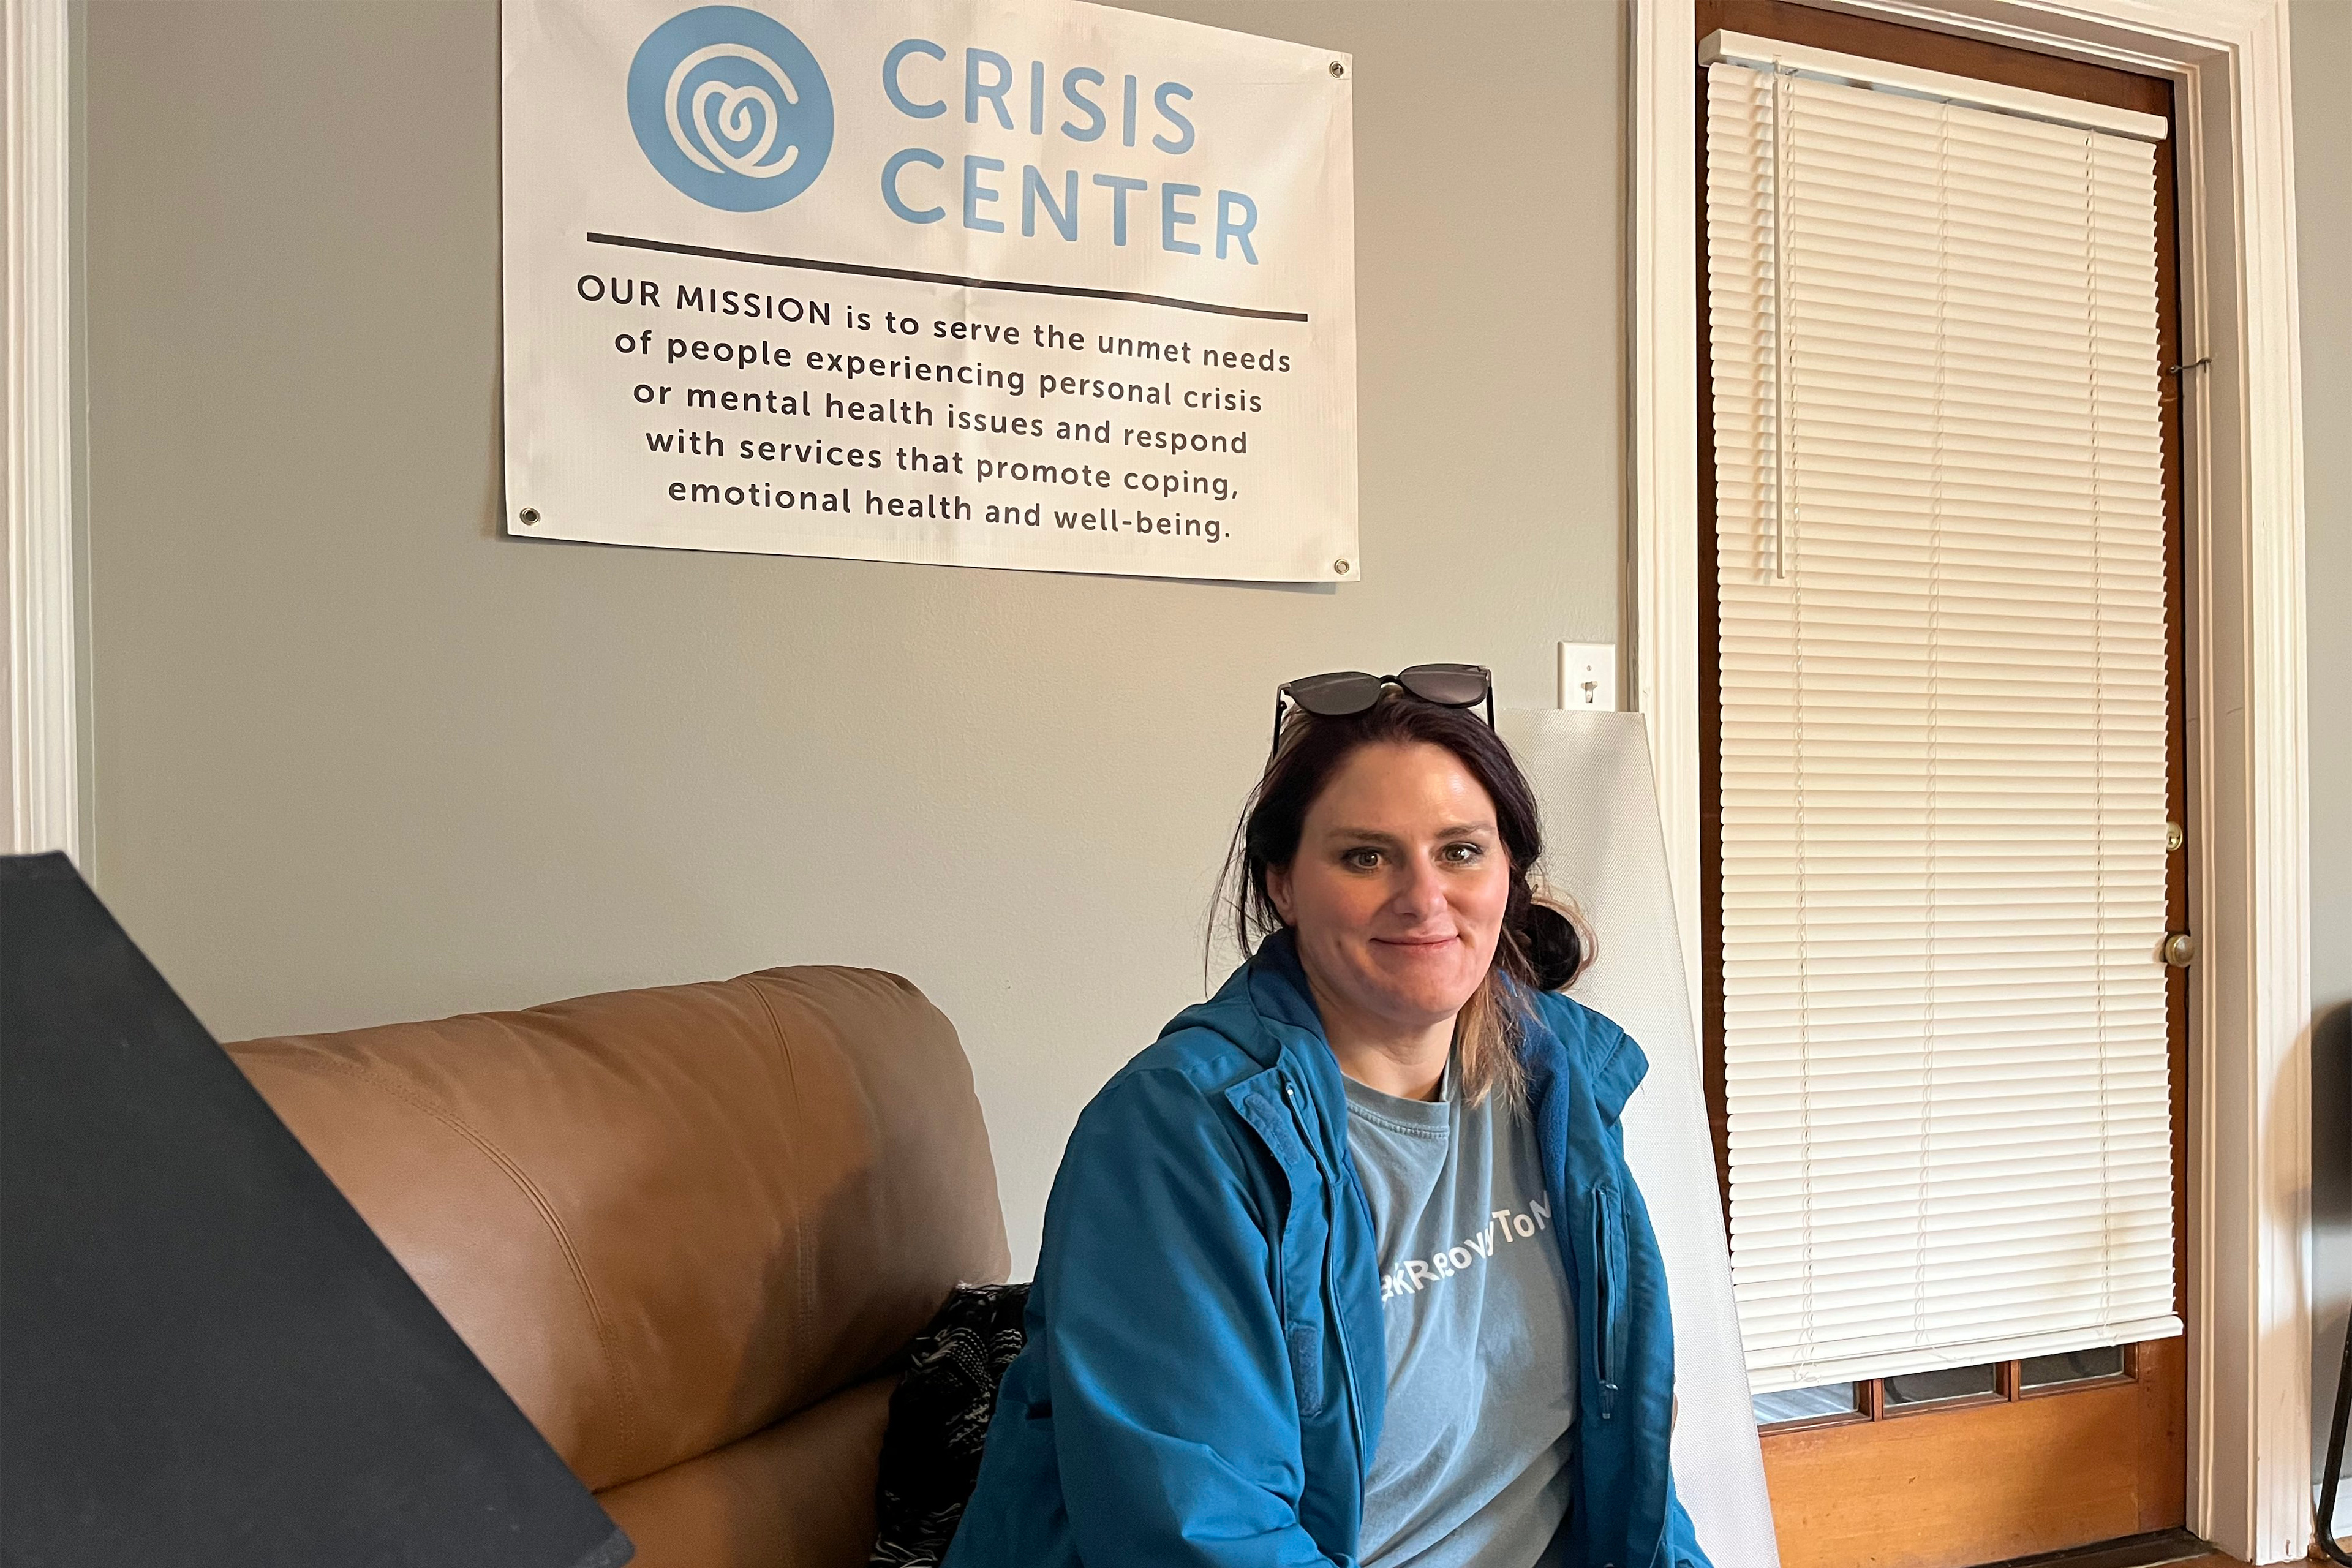 A photo of a woman sitting indoors in front of a banner that reads, "Crisis center."